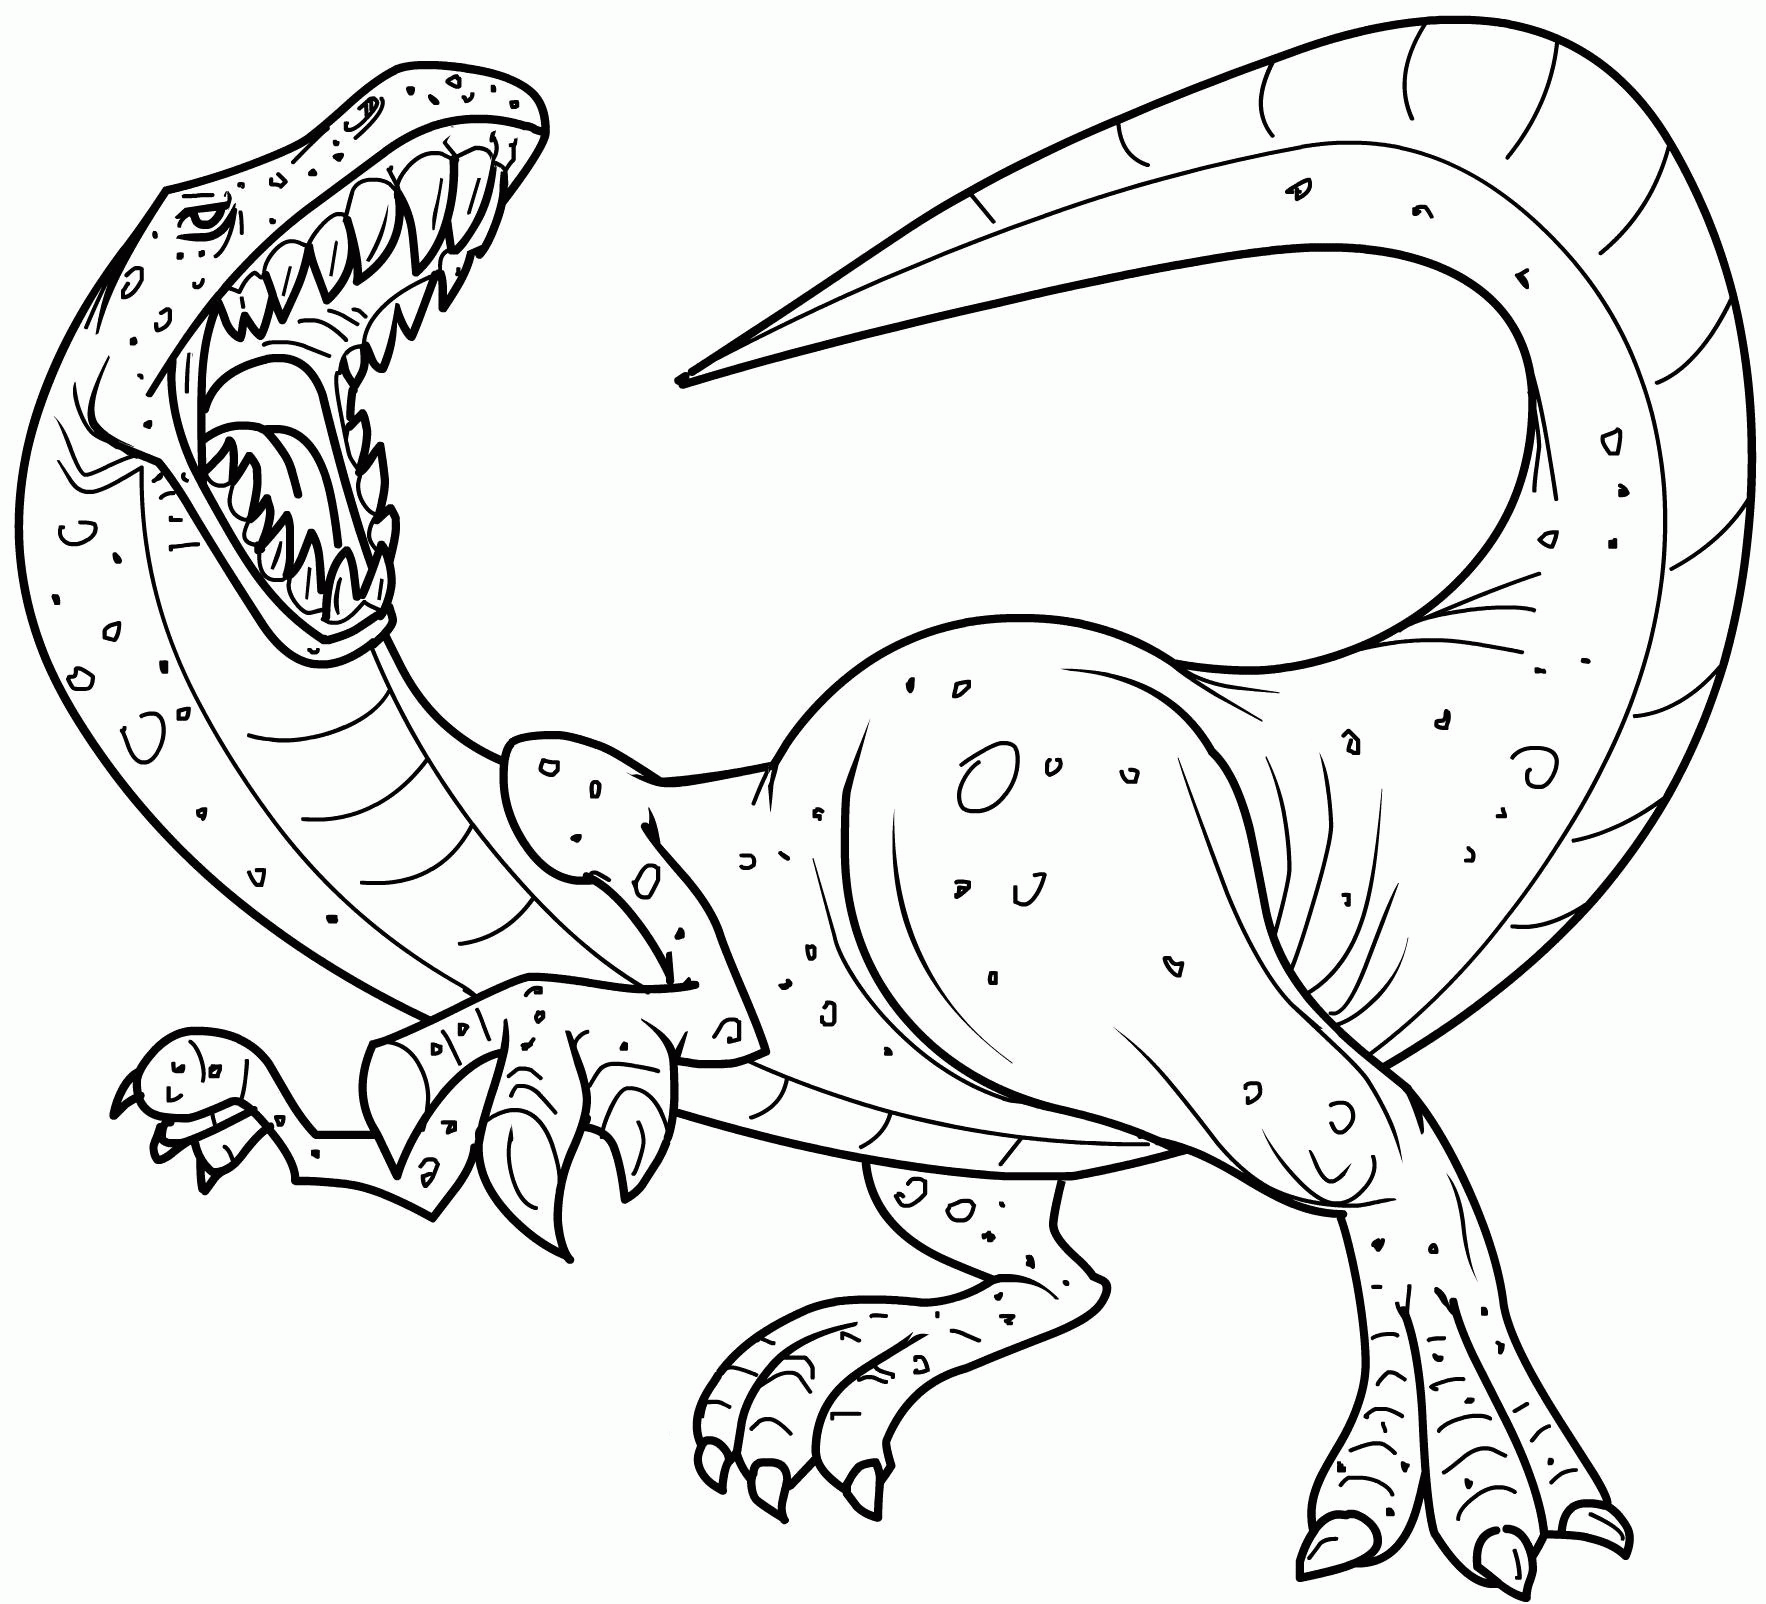 Coloring Pages Of Dinosaurs To Print - Coloring Home